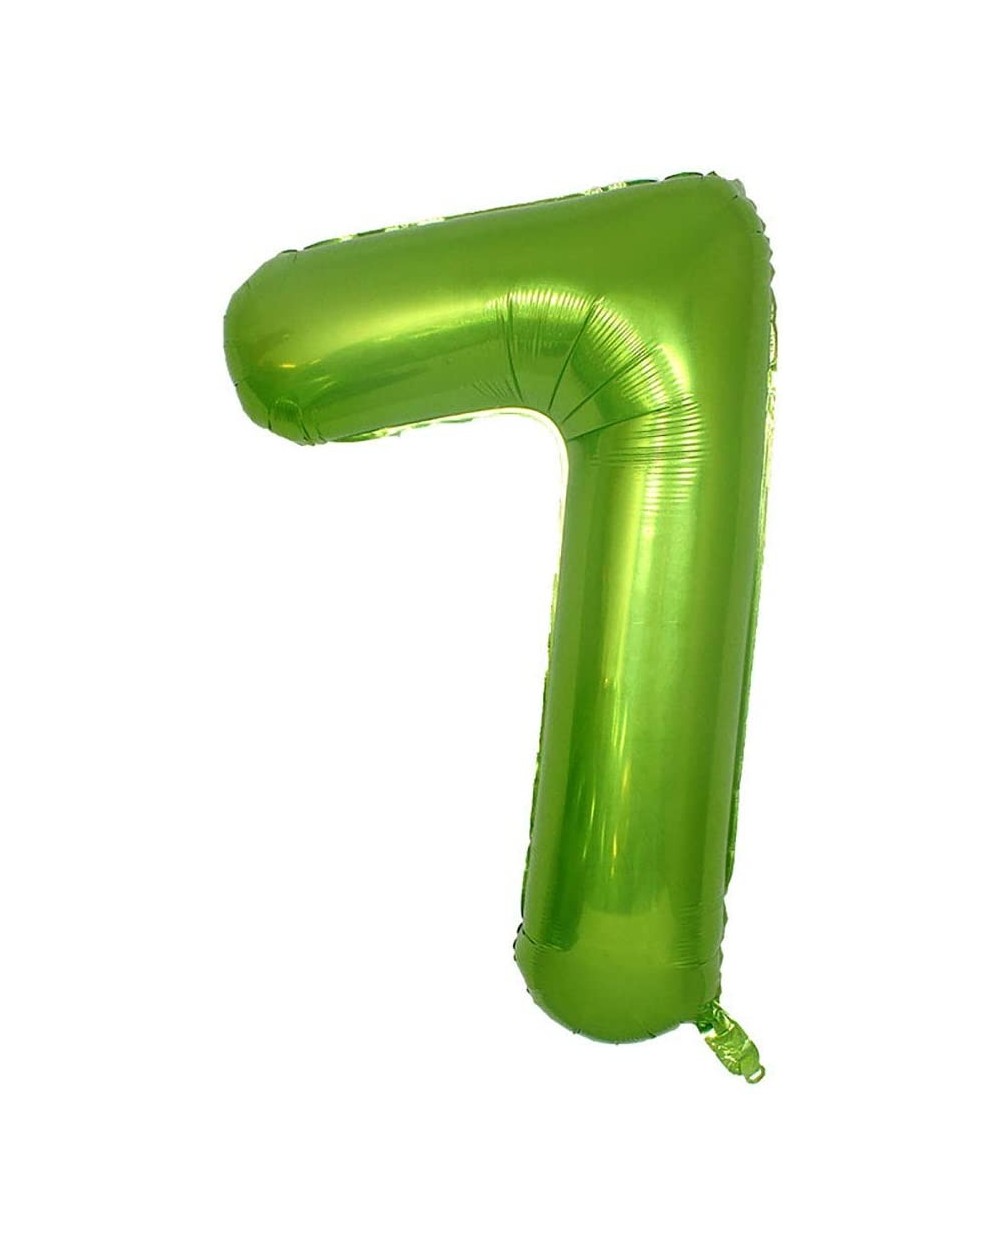 Balloons 40 Inch Green Alphabet Letter Foil Helium Digital Balloons Number 7 for Birthday Anniversary Party Festival Decorati...